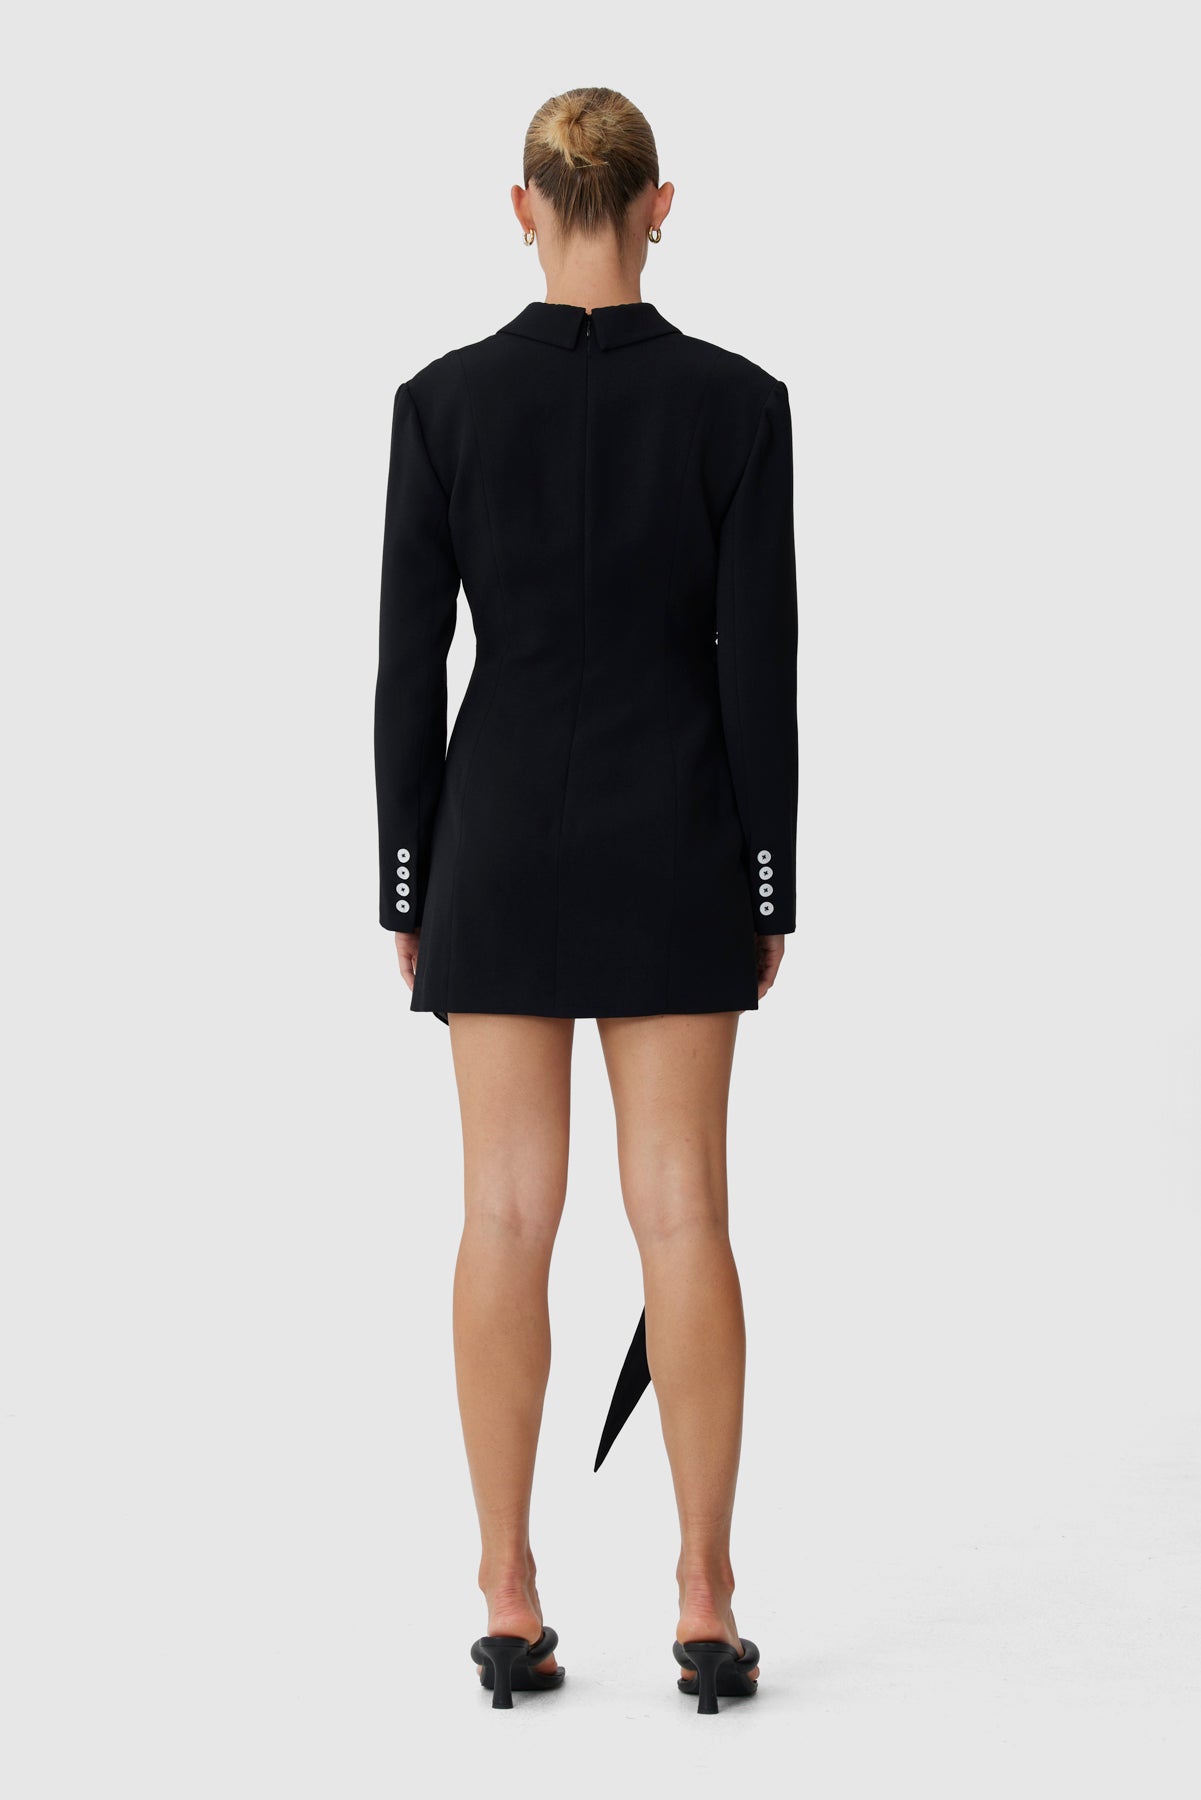 C/MEO Collective - Caught Up Dress - Black